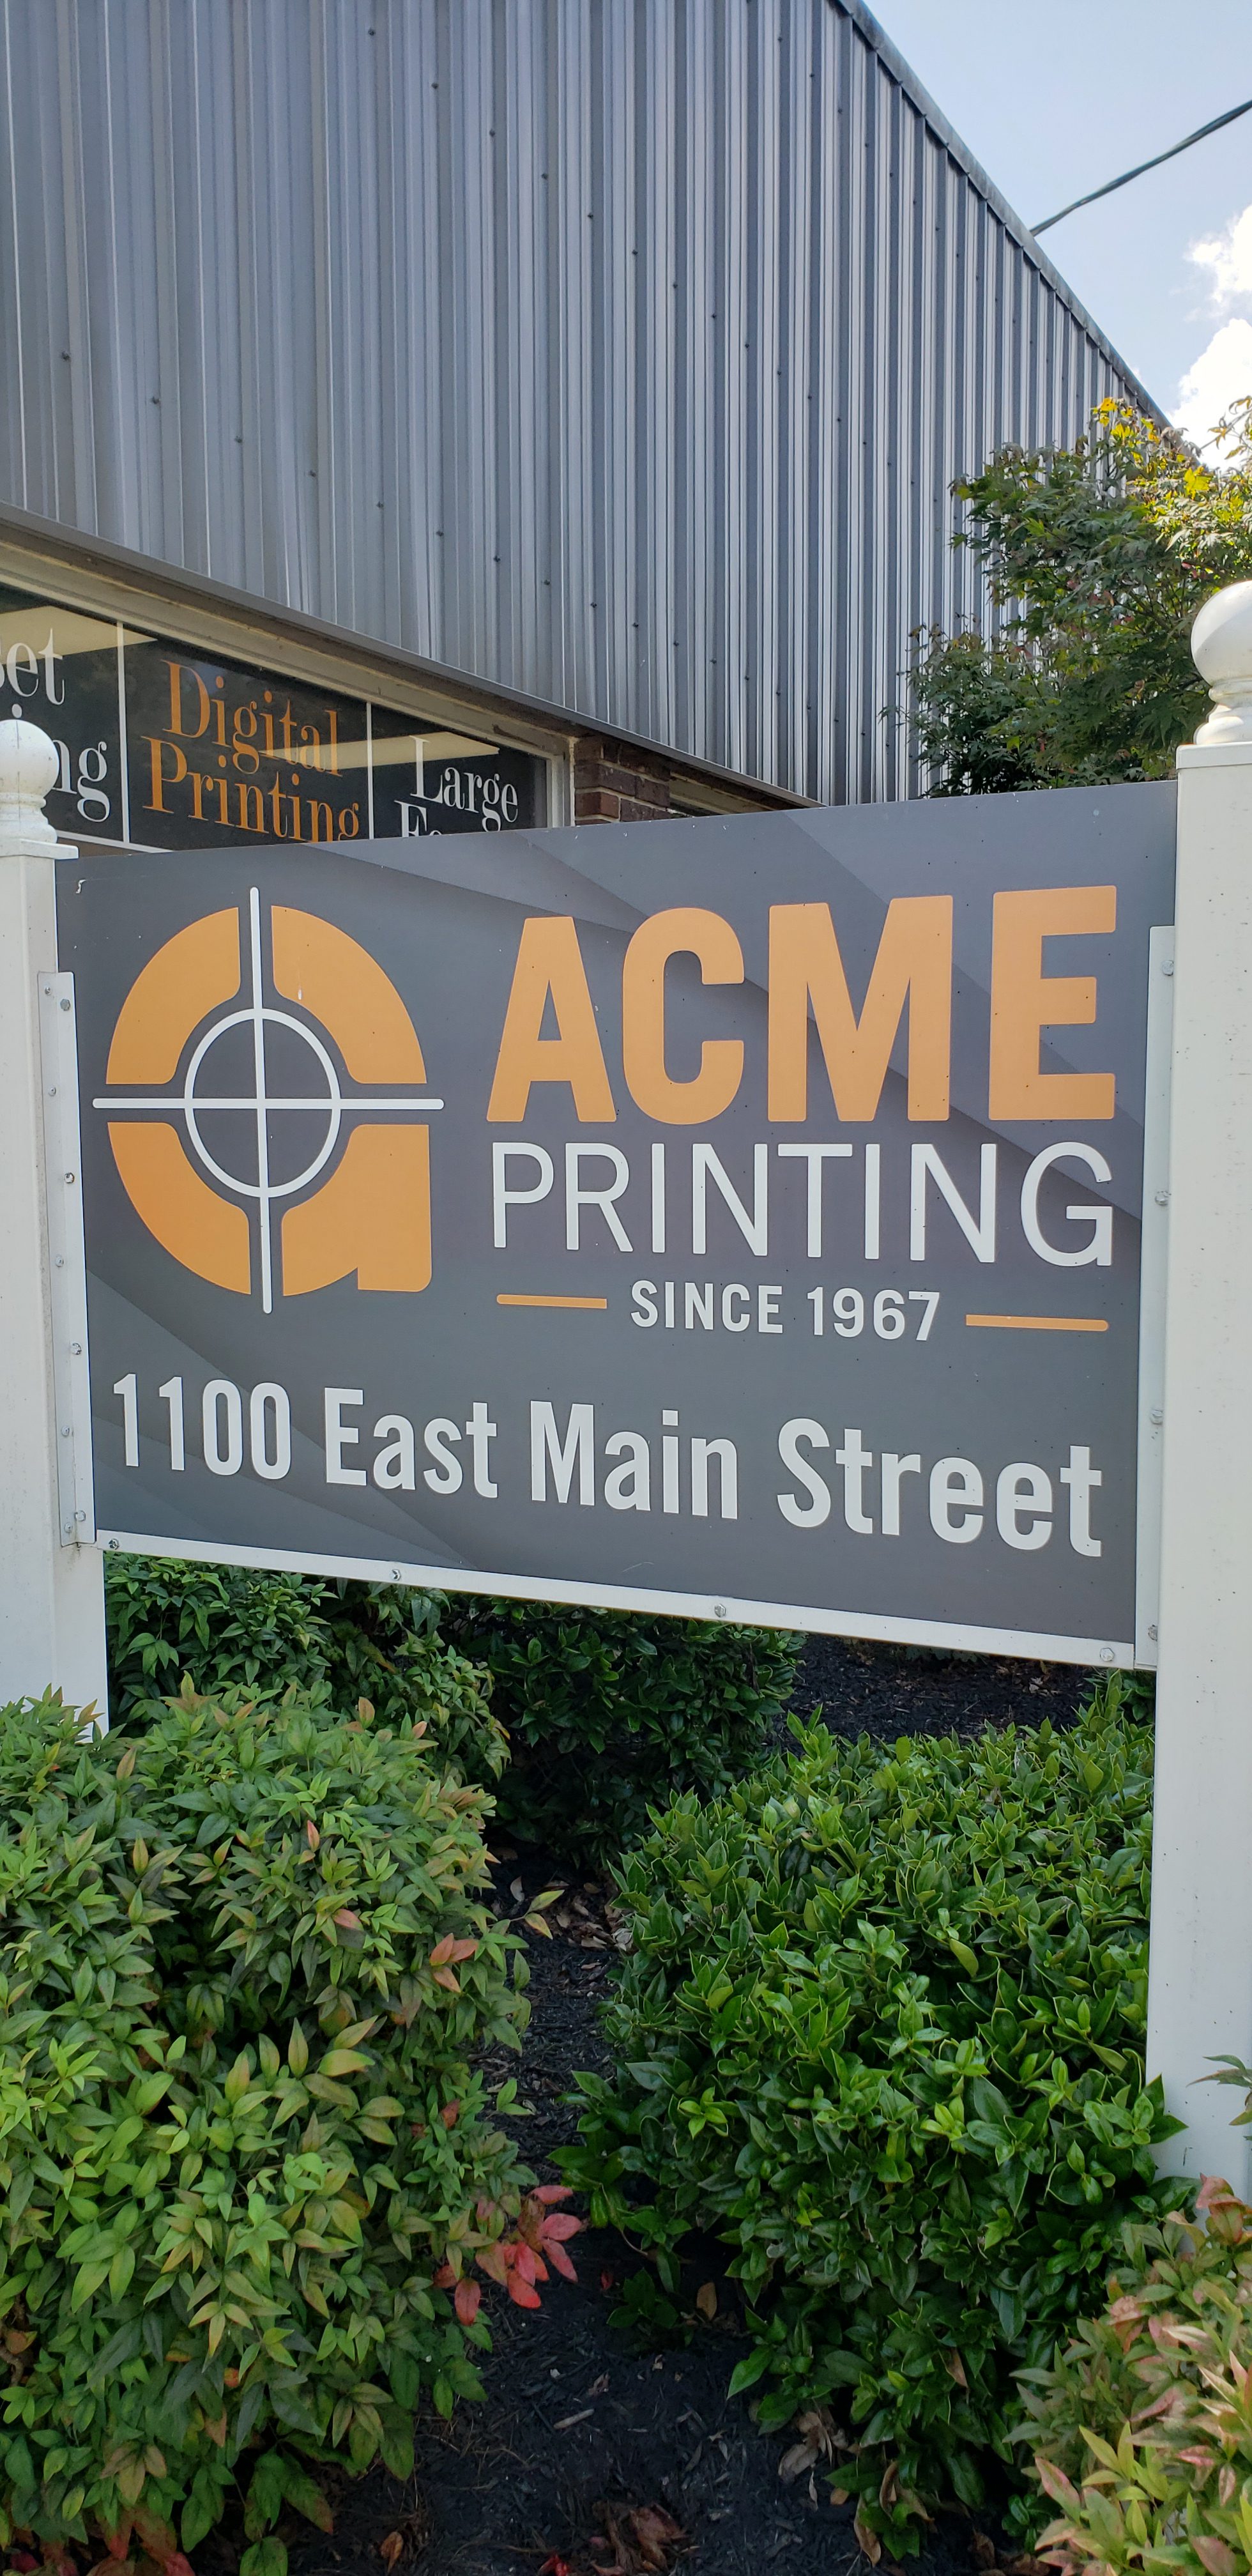 Acme Printing sign in Morristown, Tennessee